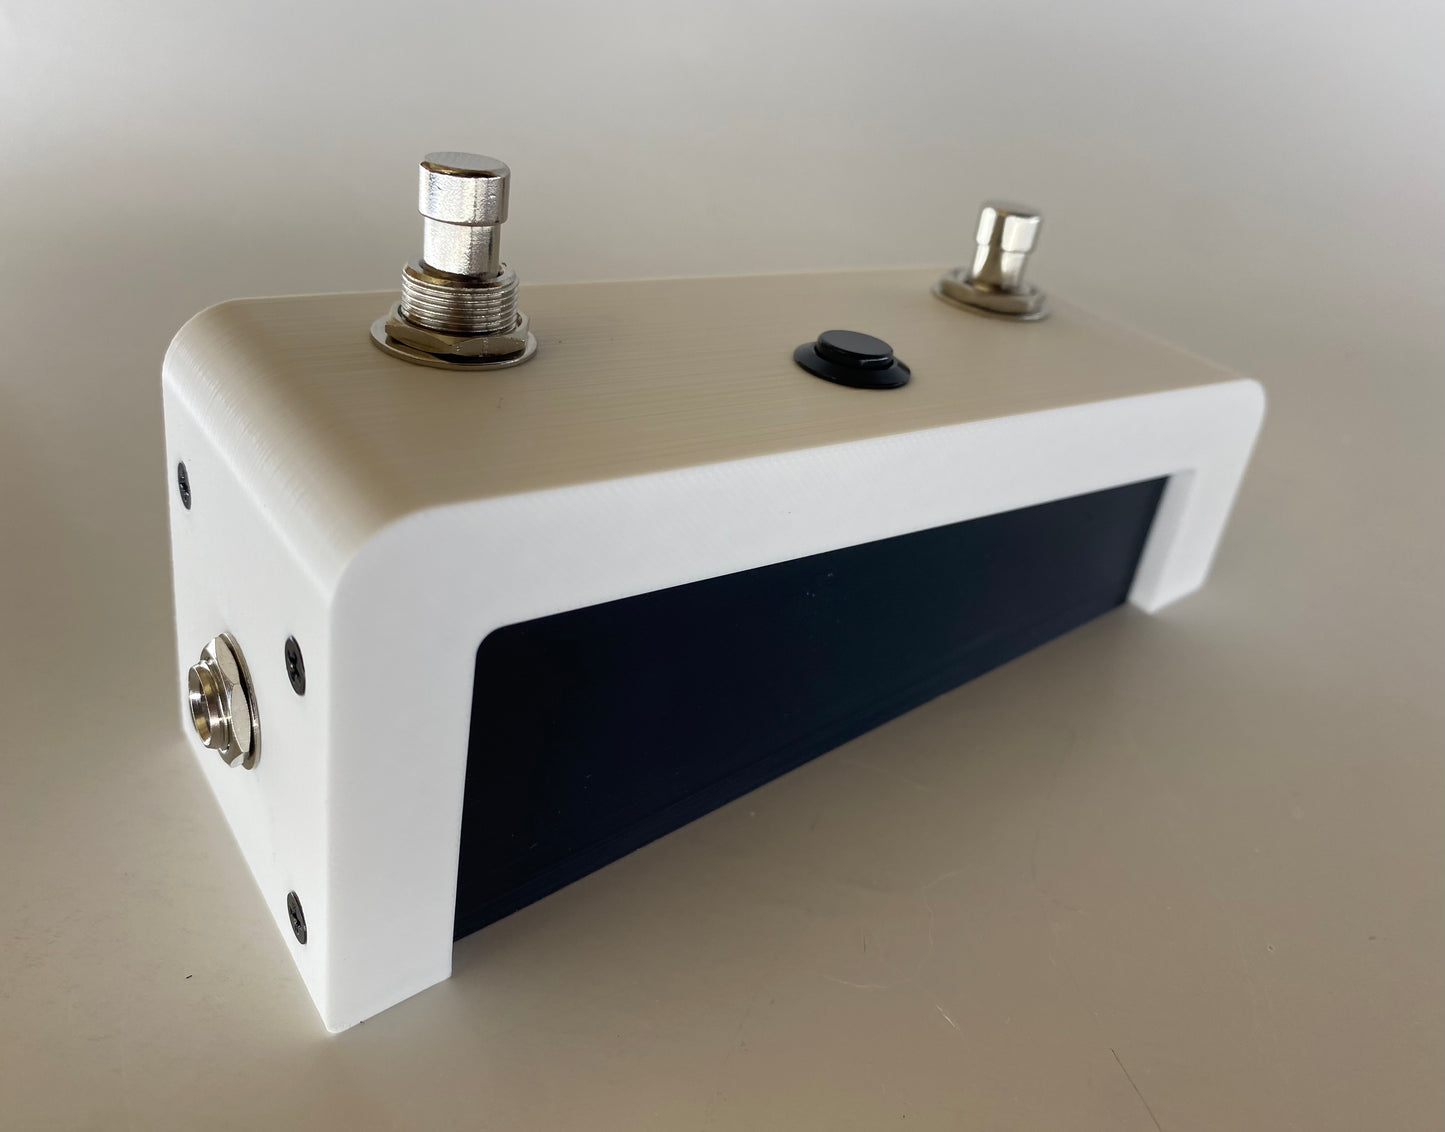 Eventide H90 profile-matching aux switch